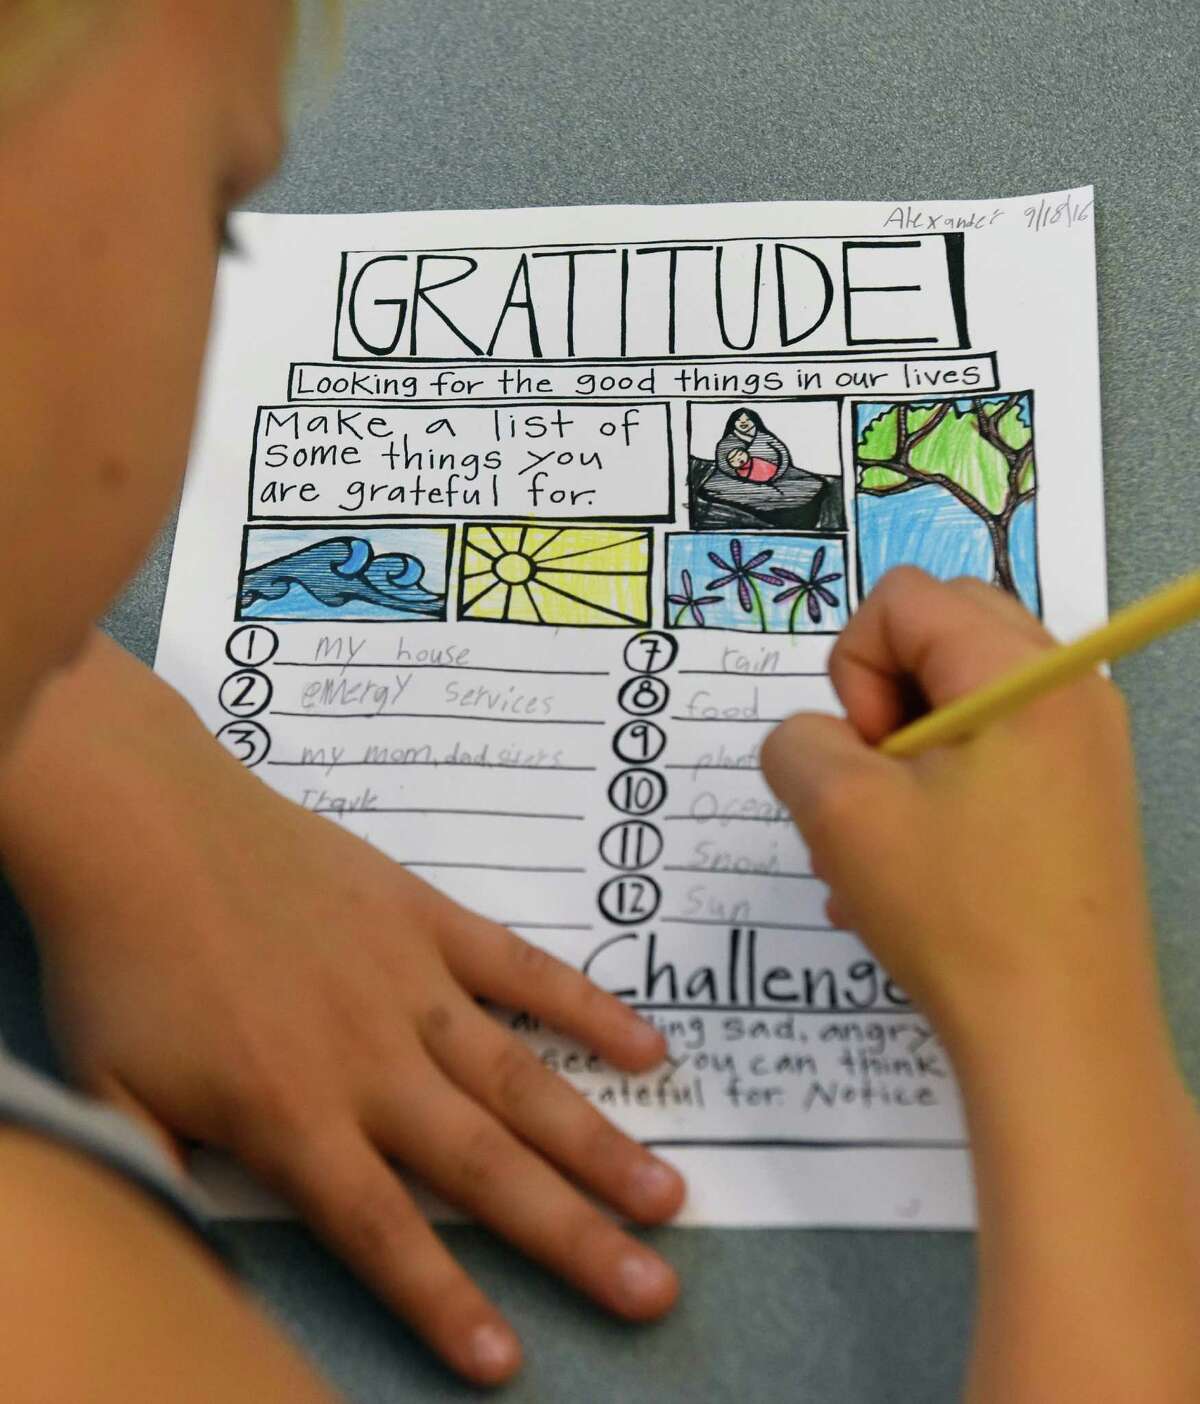 Fourth-grader Alexander Harpoth writes a list of things he is grateful for during a mindfulness exercise at Cos Cob School in the Cos Cob section of Greenwich, Conn. Wednesday, Sept. 28, 2016. Fourth-grade teacher Heather Lemelin is one of many teachers in the district who is working to bring the practice of mindfulness into the classroom. Lemelin uses the practice to help deal with the variety of learning styles and behaviors of her students and to alleviate student conflicts.